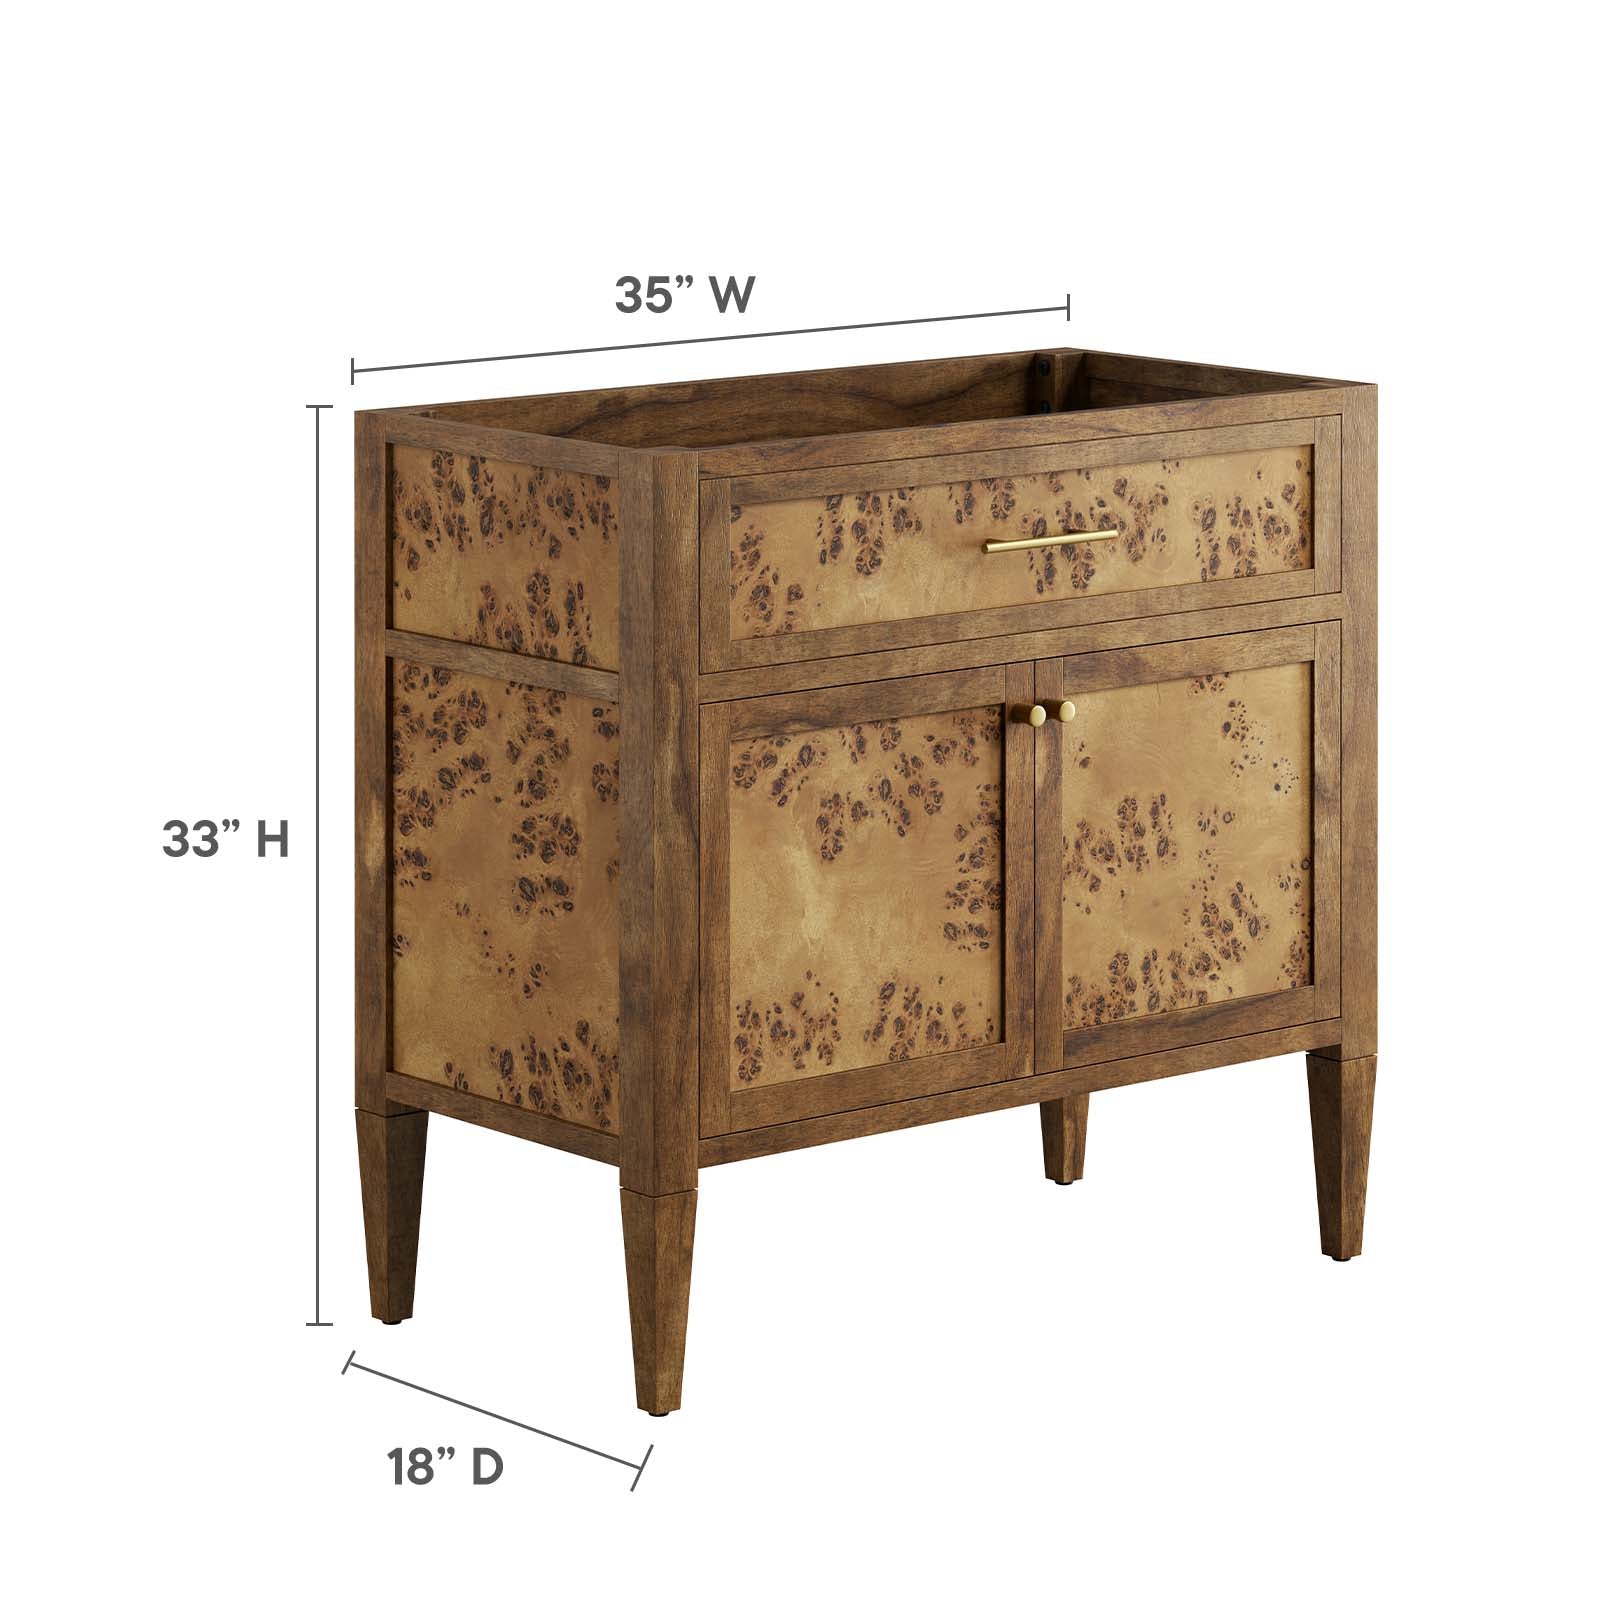 Elysian 36" Wood Bathroom Vanity Cabinet (Sink Basin Not Included) By Modway - EEI-6139 | Bathroom Accessories | Modway - 8